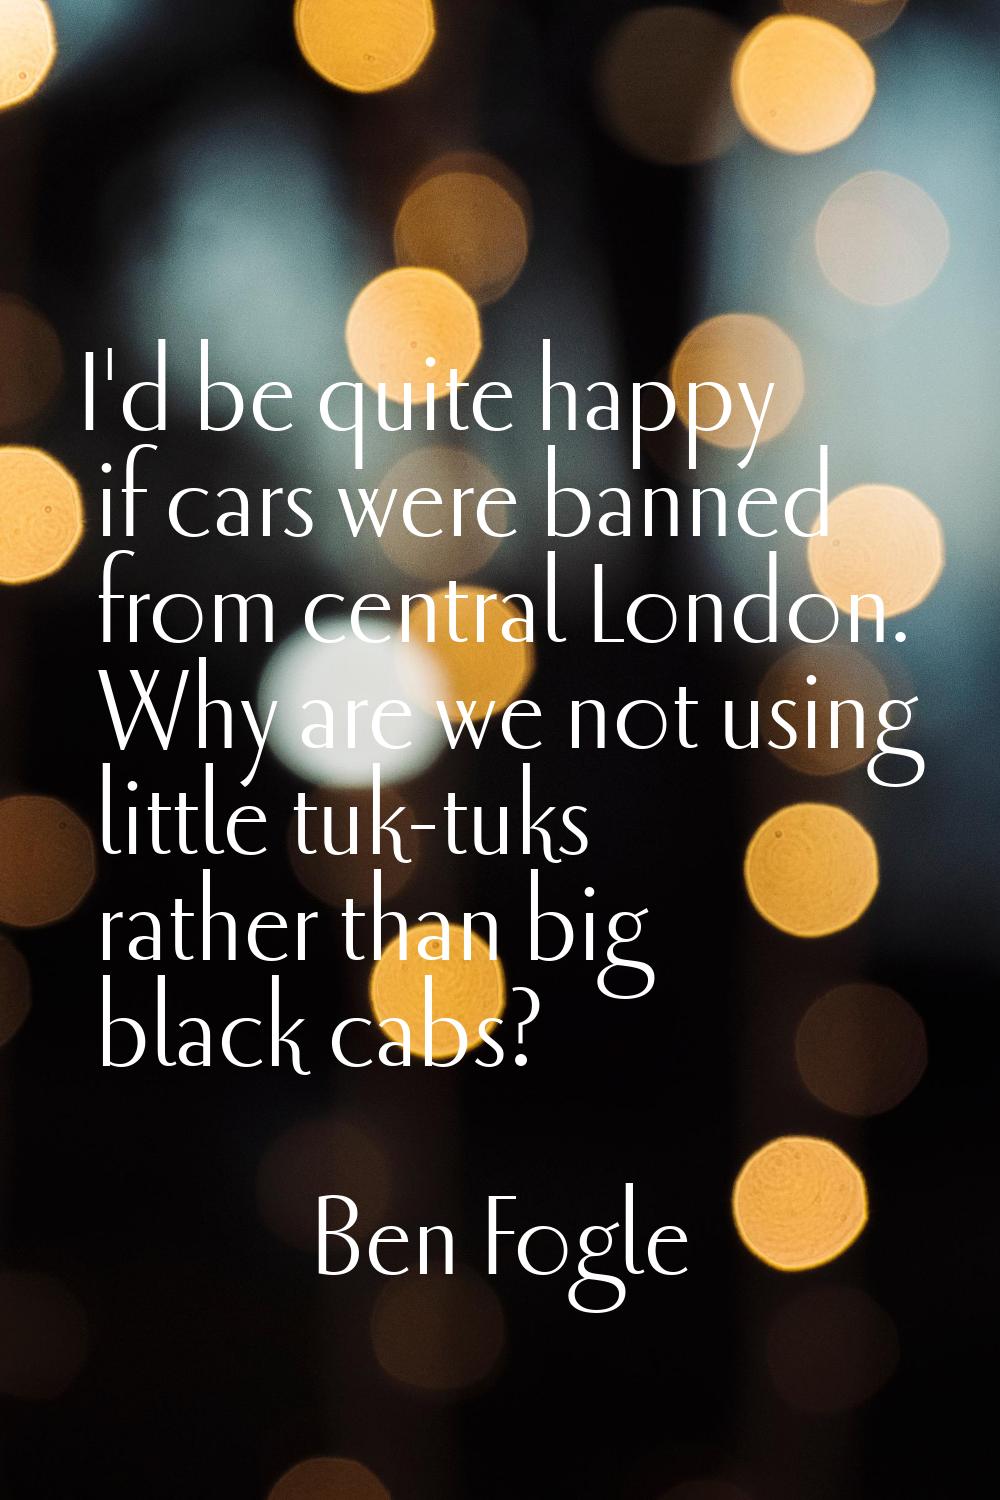 I'd be quite happy if cars were banned from central London. Why are we not using little tuk-tuks ra